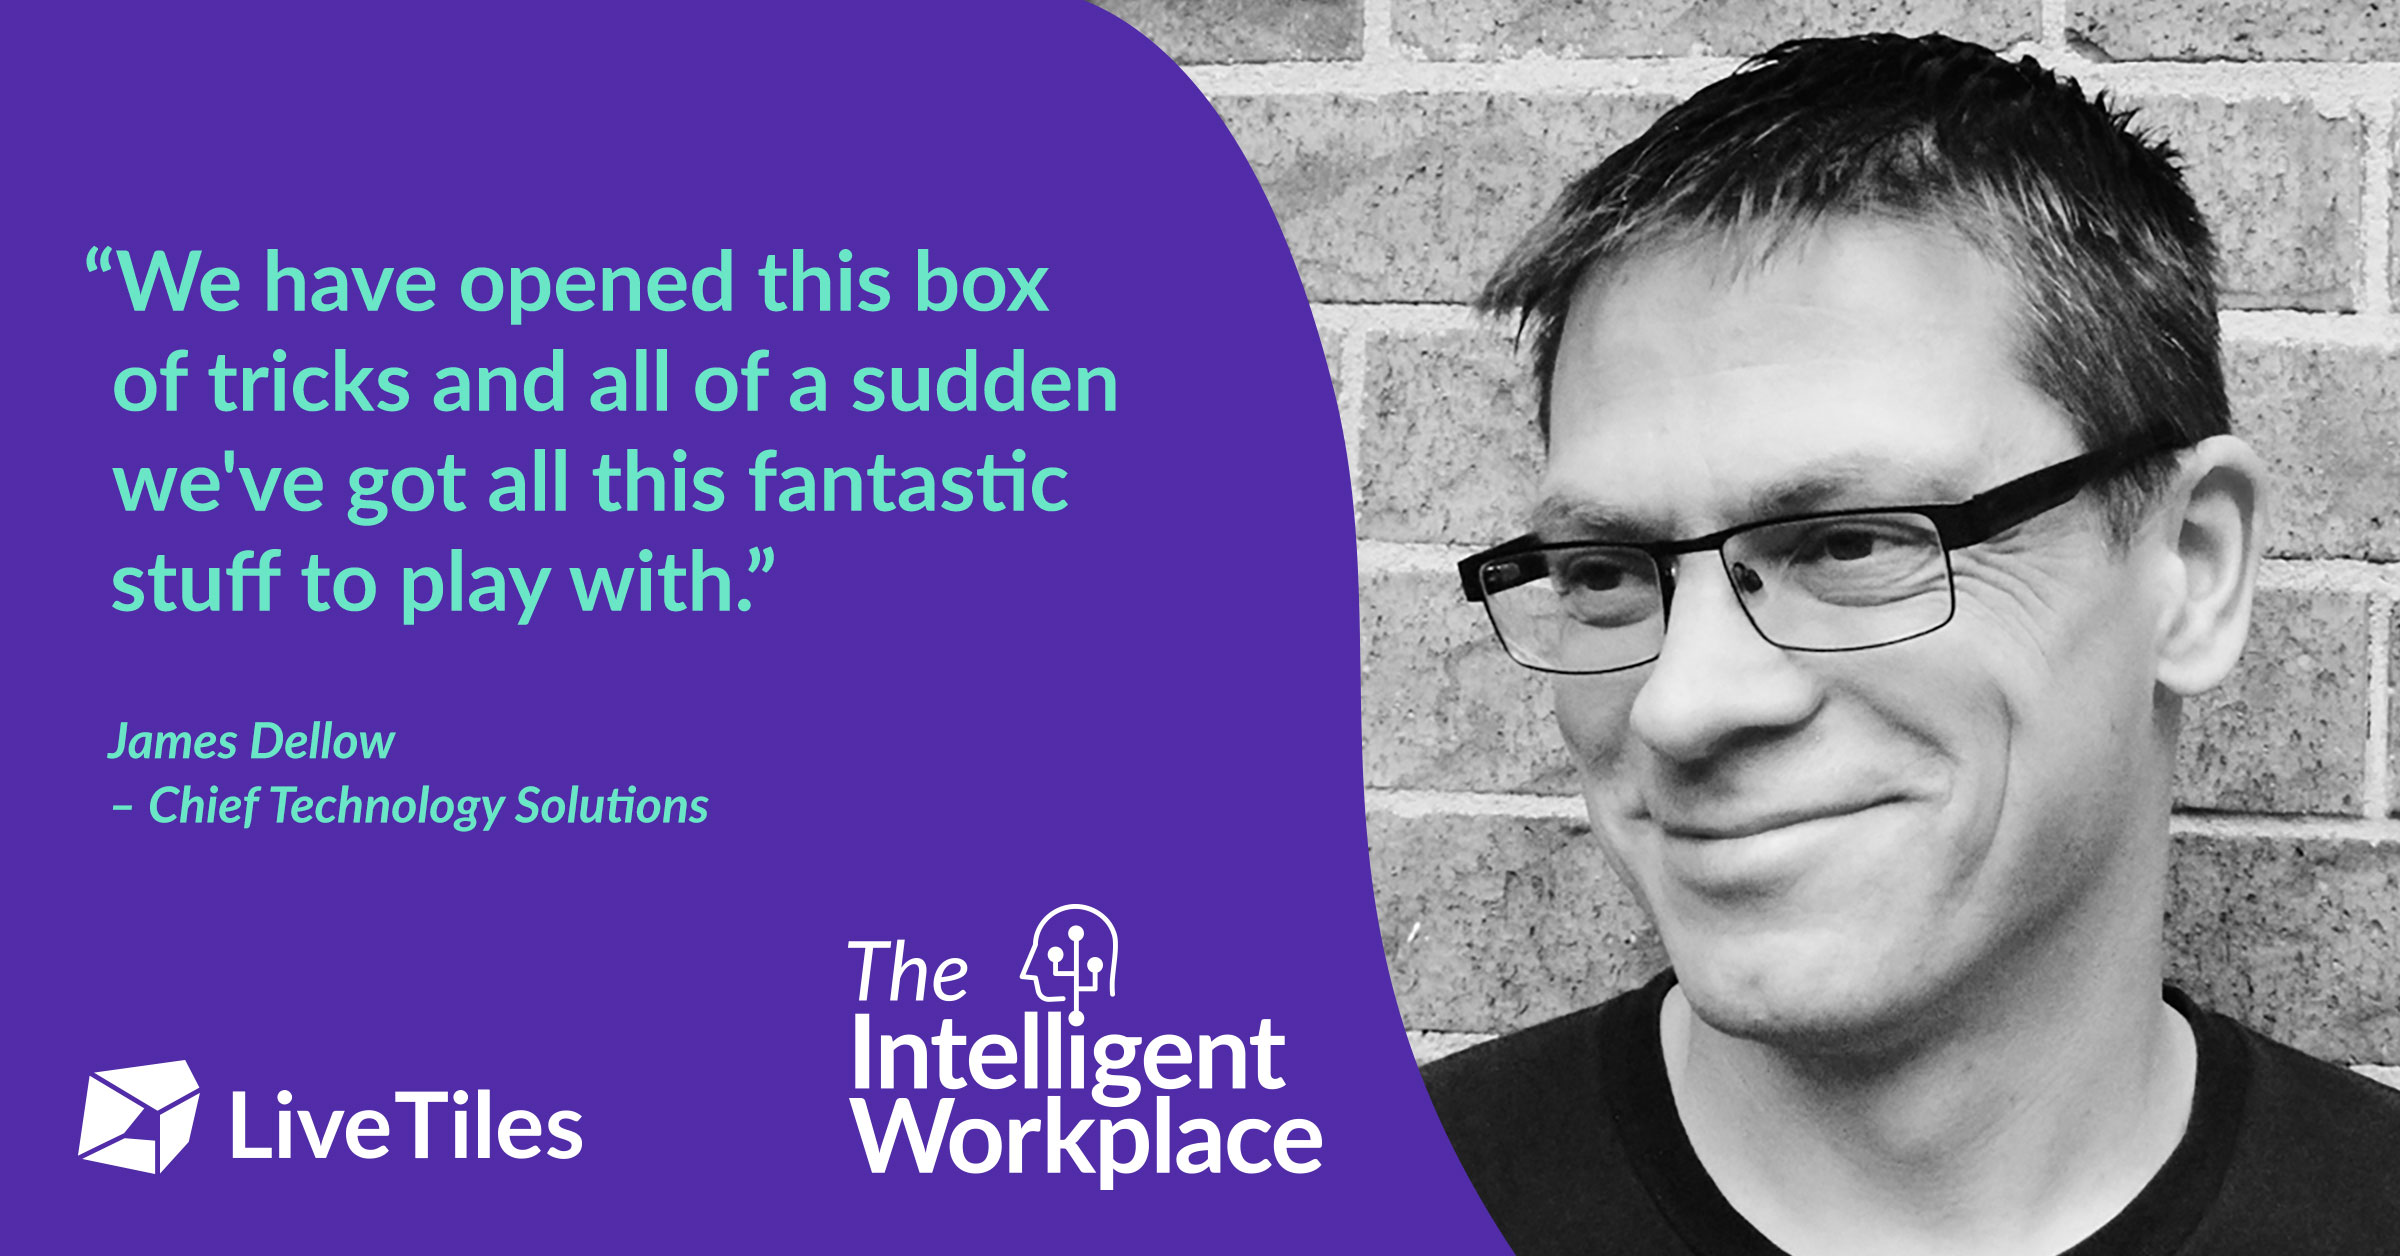 LiveTile's Intelligent Workplace podcast featuring James Dellow